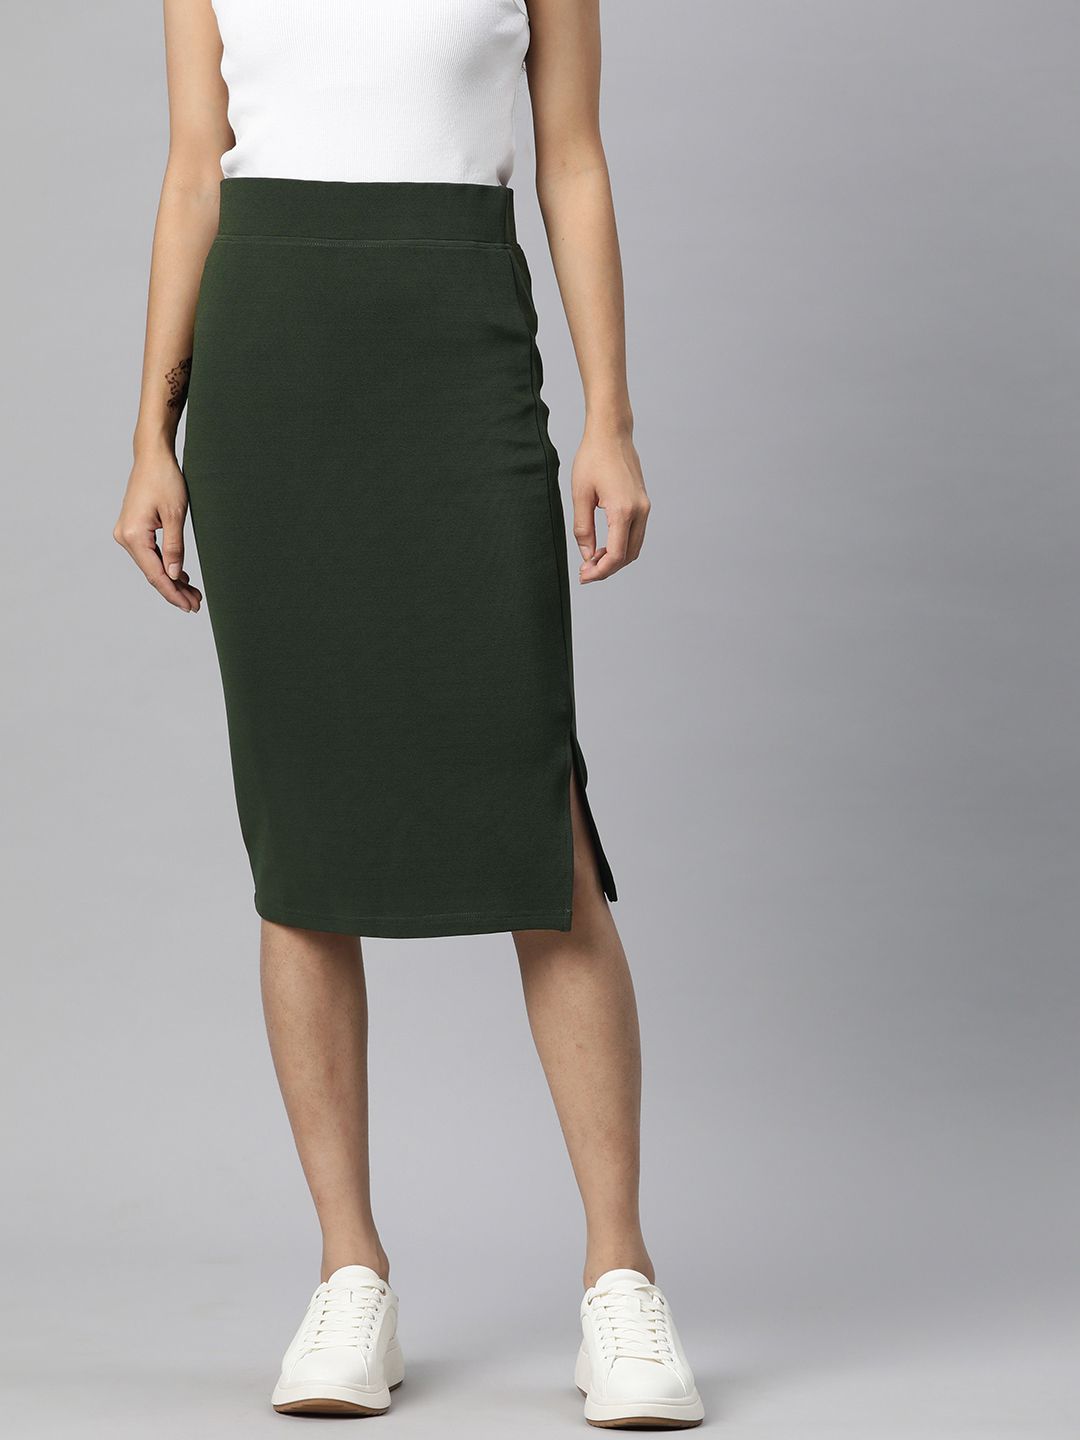 Popnetic Olive Solid Side Slit Pencil Skirt Price in India